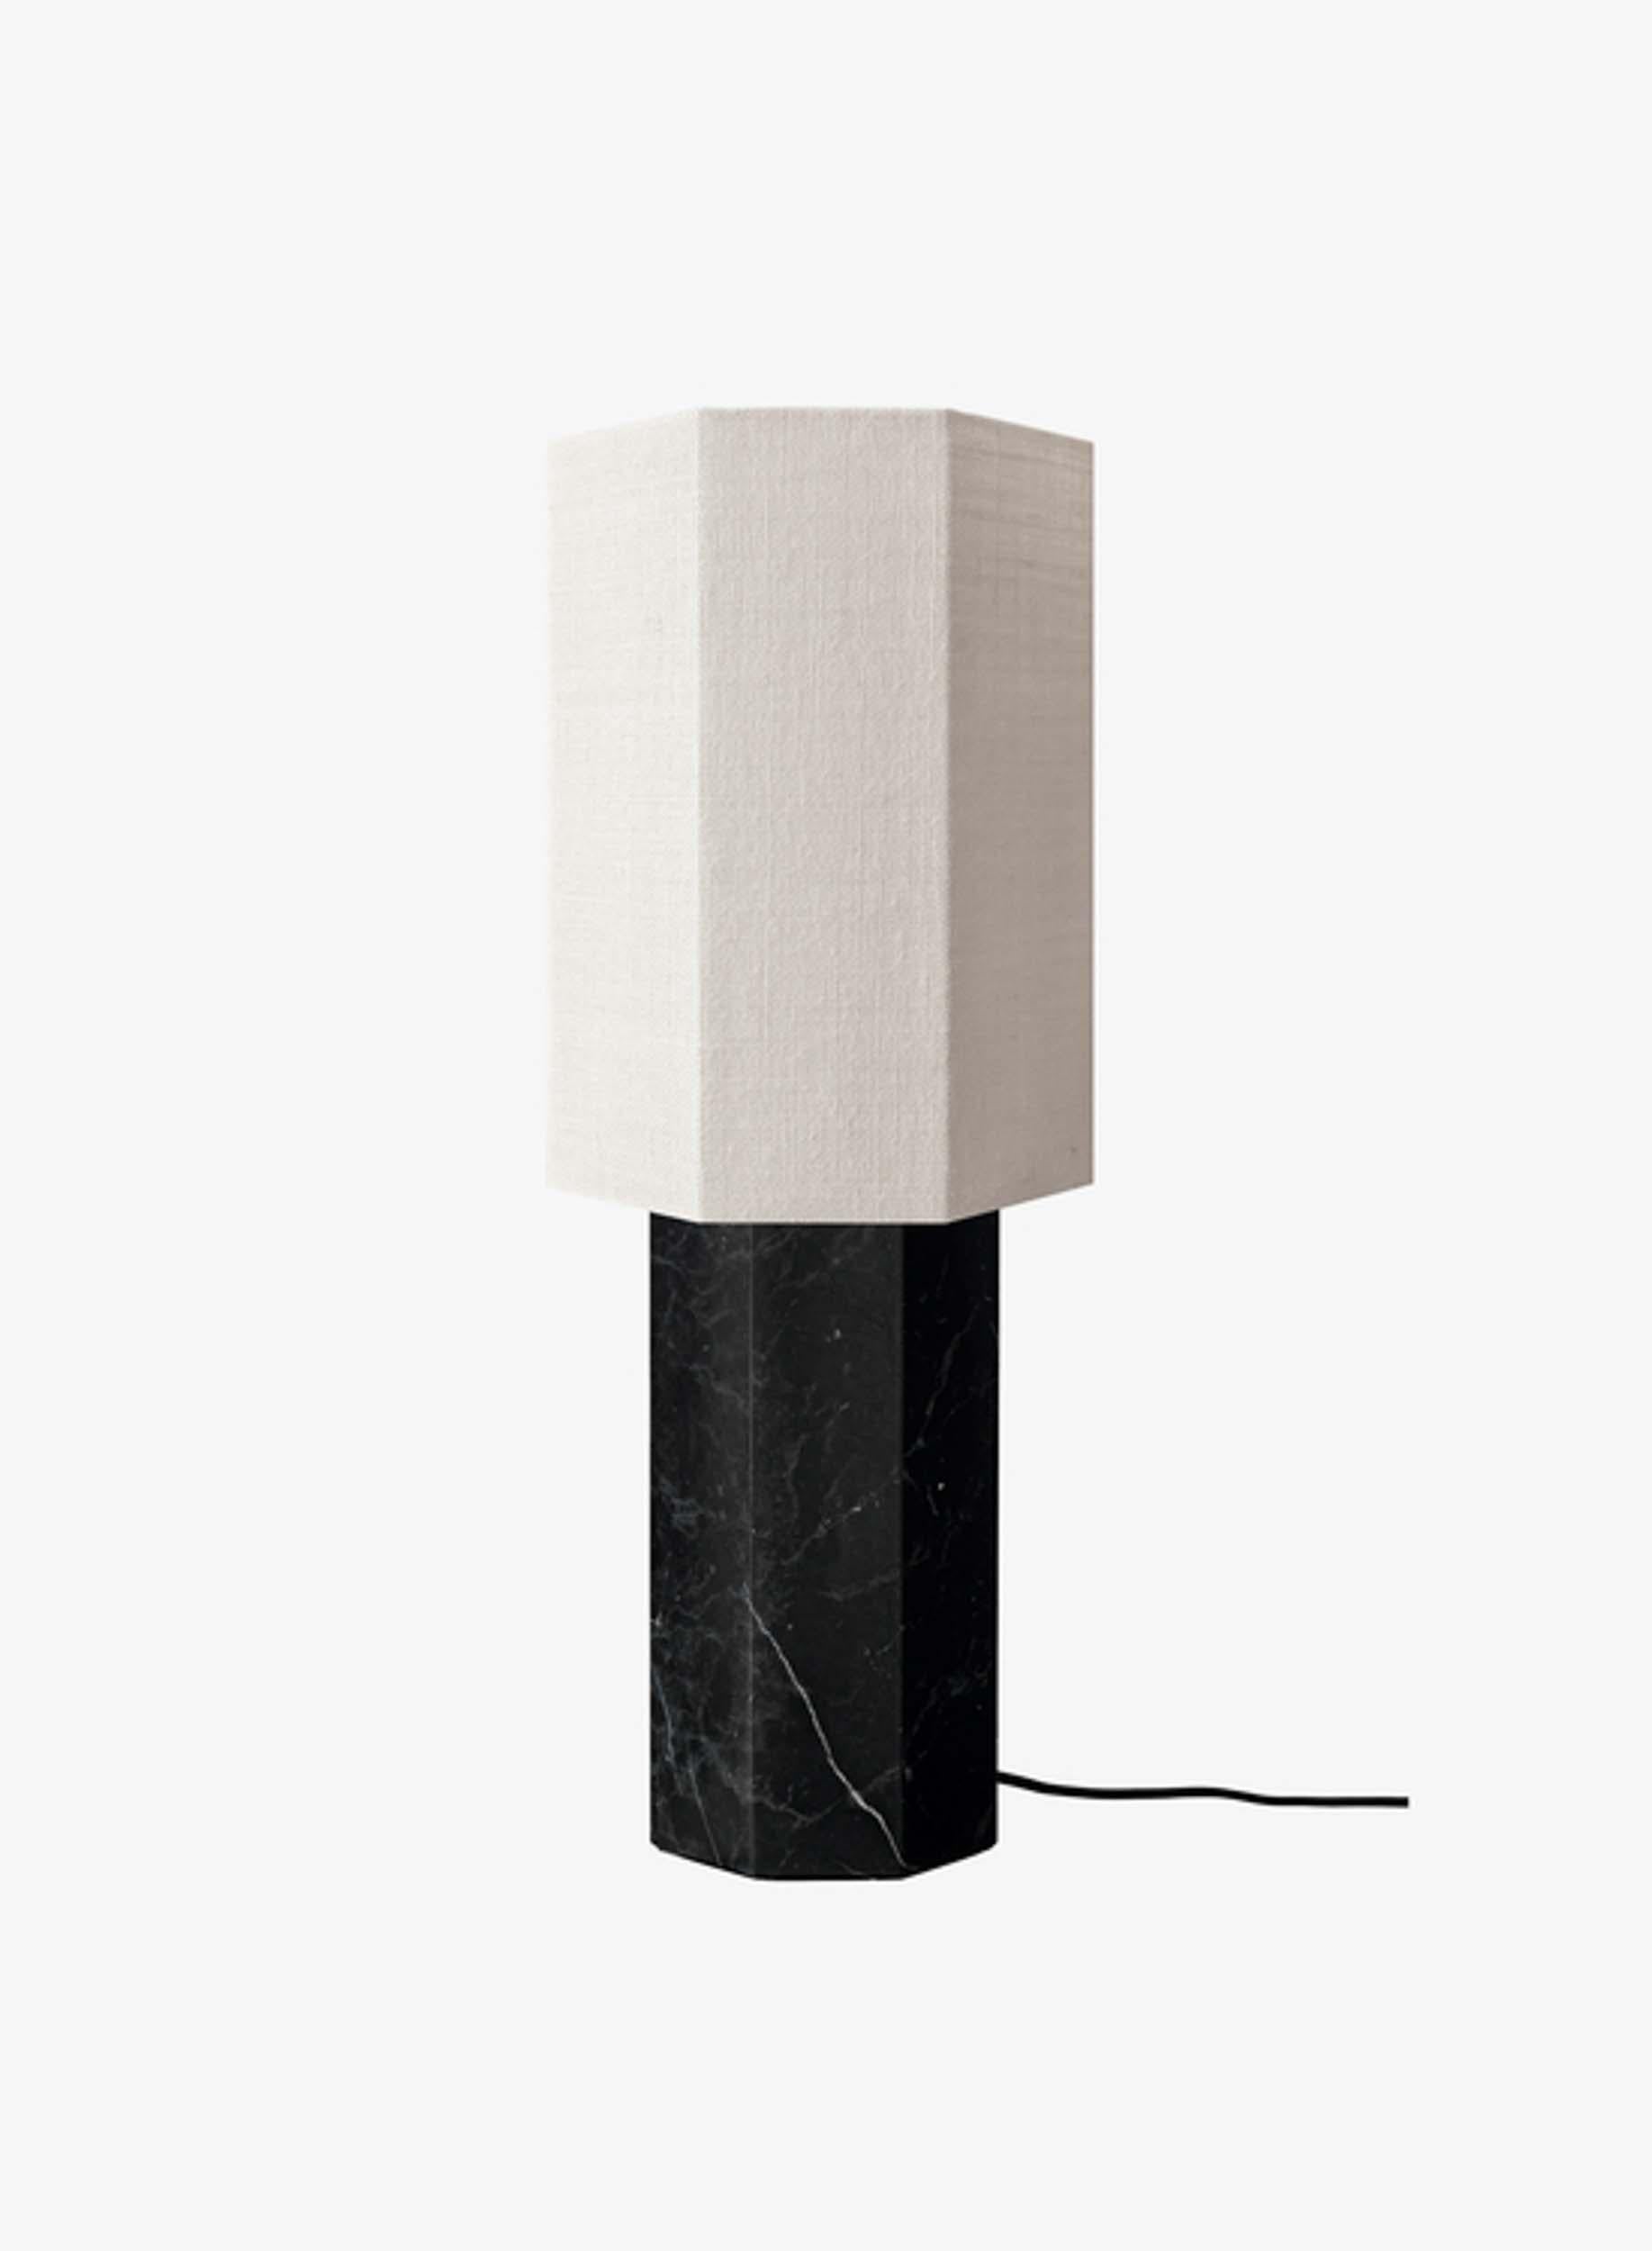 Table Lamp 'The Eight over Eight' by Louise Roe 

Designed in Denmark and manufactured in Italy.

Model shown in the picture: 
Base: Black marble
Lampshade: Jute White 

Dimensions : 
Height: 60 cm
Diameter: 21.5 cm

Louise Roe is a